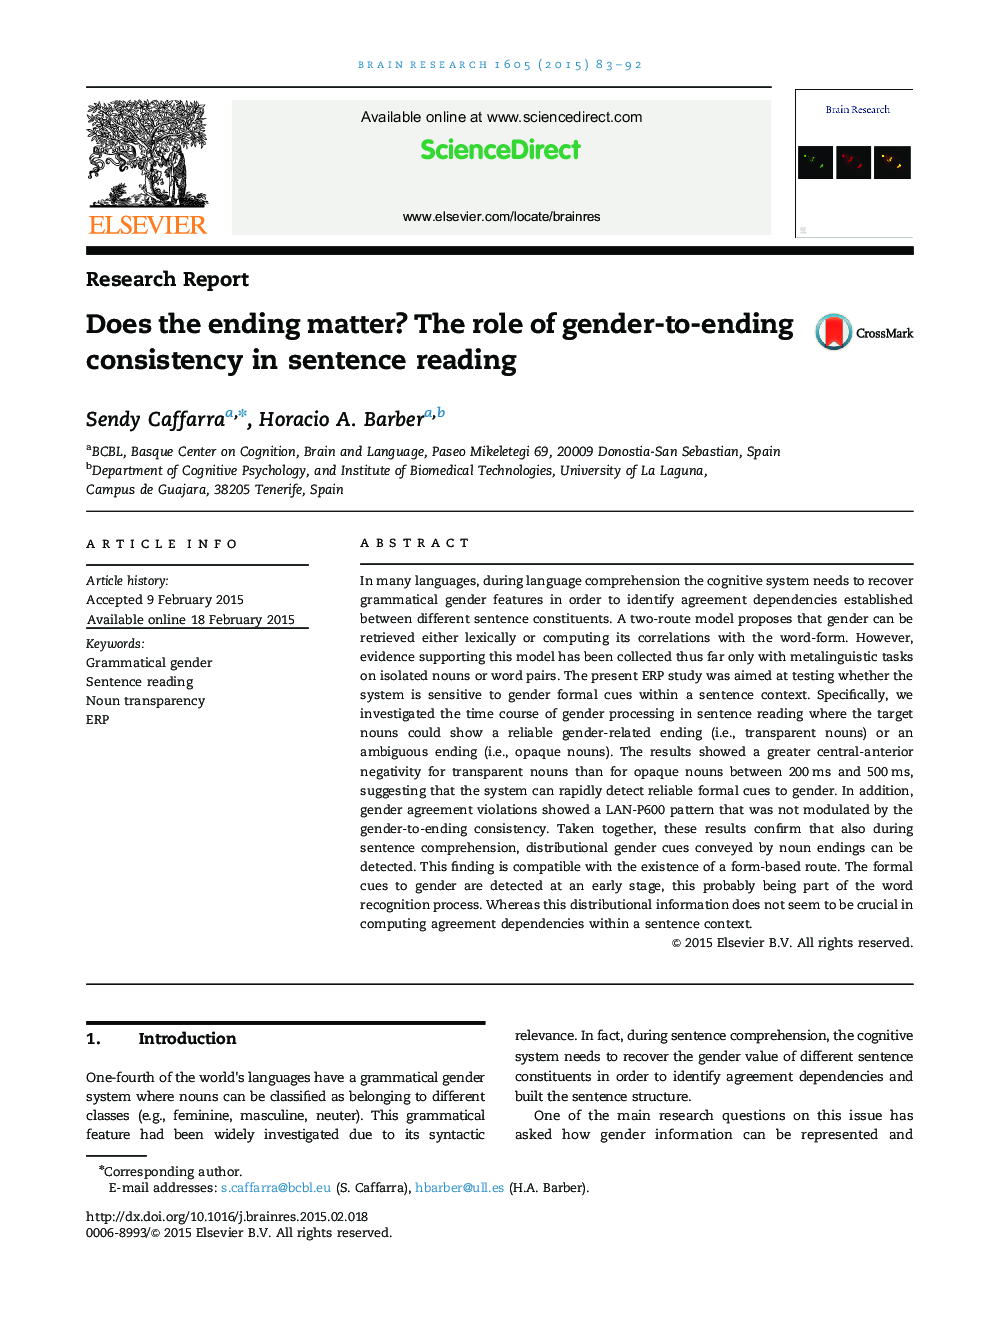 Does the ending matter? The role of gender-to-ending consistency in sentence reading